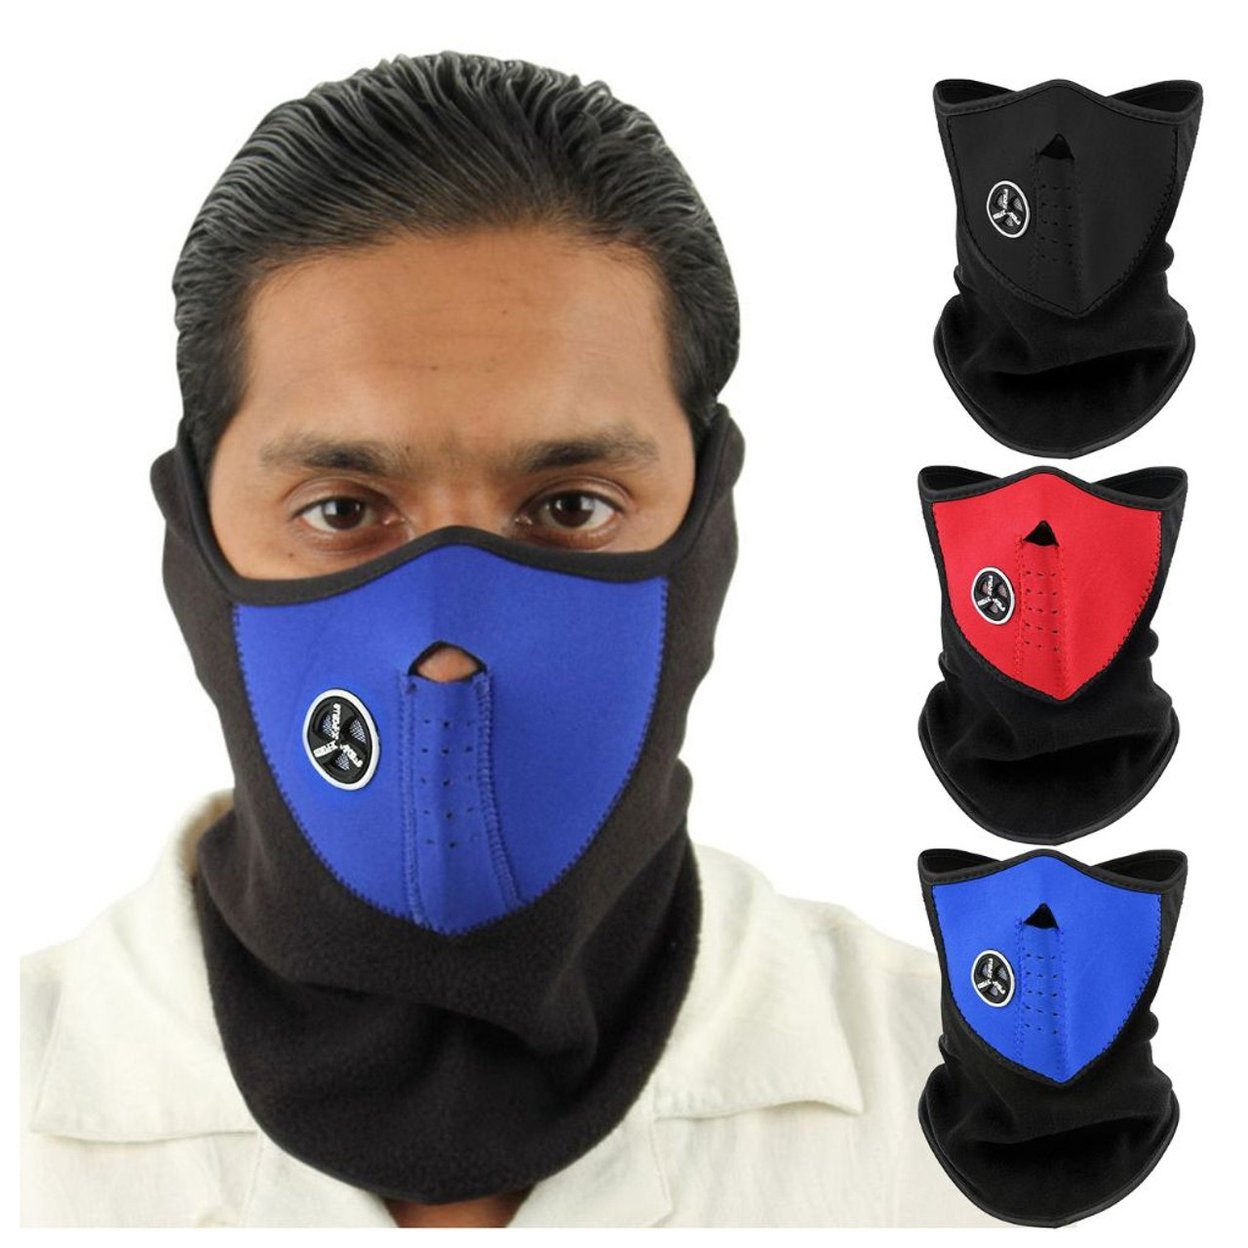 3-Pack: Men's Warm Winter Windproof Breathable Cozy Thermal Balaclava Winter Ski Face Mask - Assorted